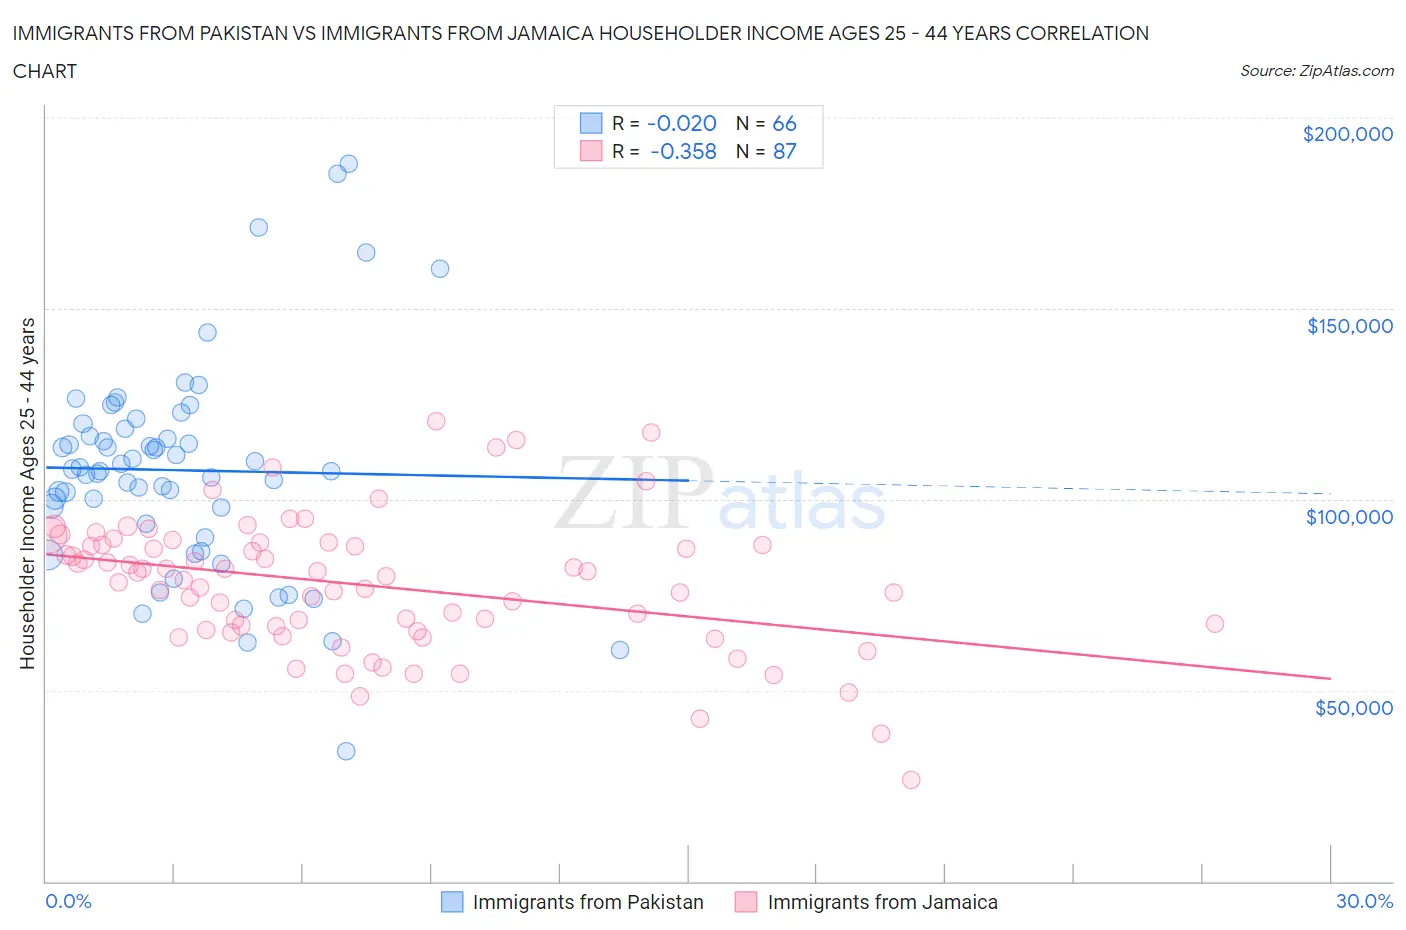 Immigrants from Pakistan vs Immigrants from Jamaica Householder Income Ages 25 - 44 years